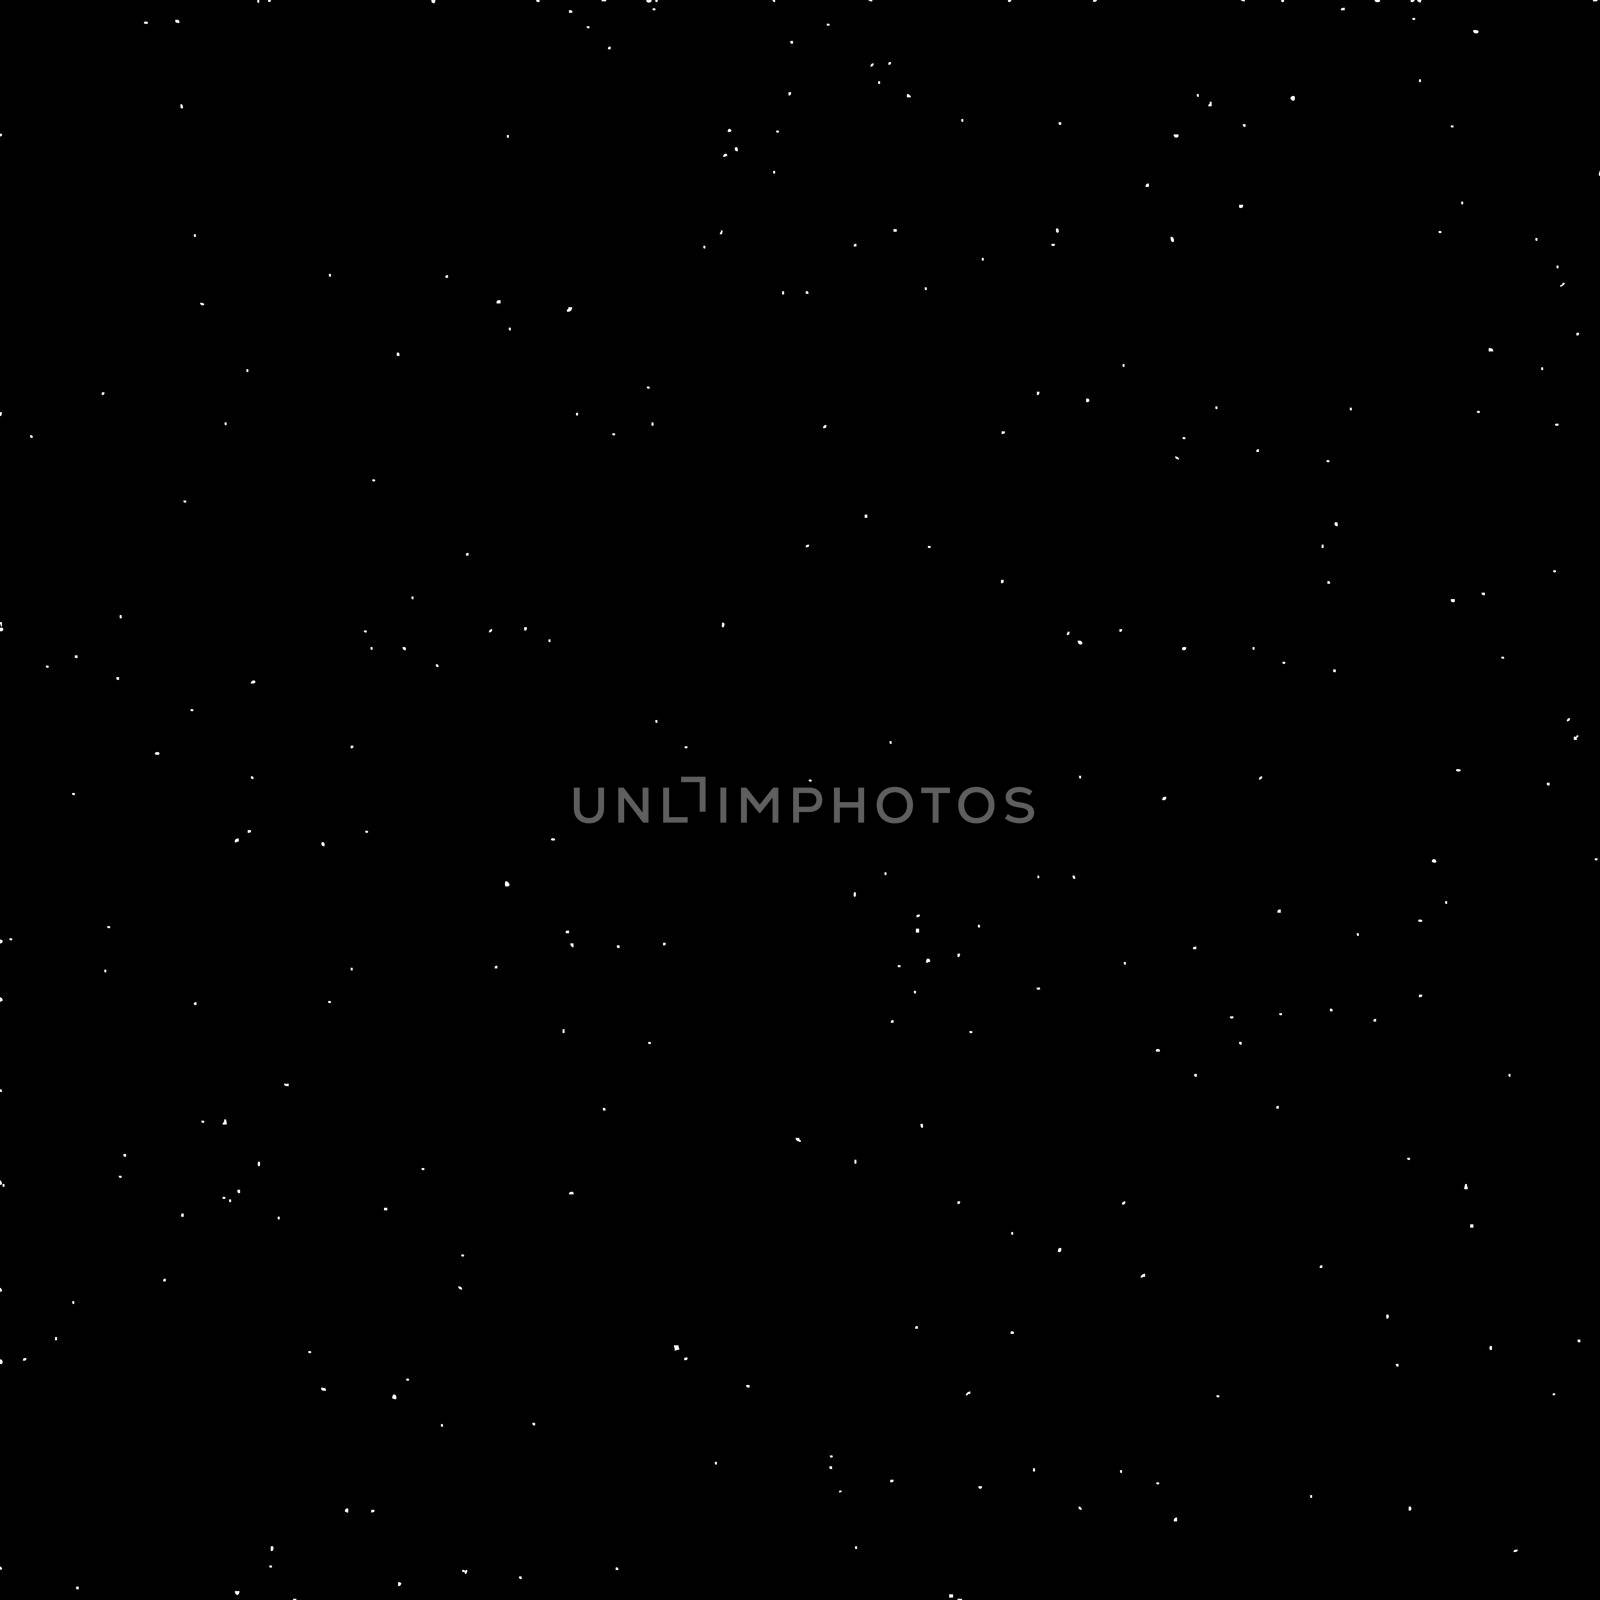 Stars and black matter in seamless background pattern